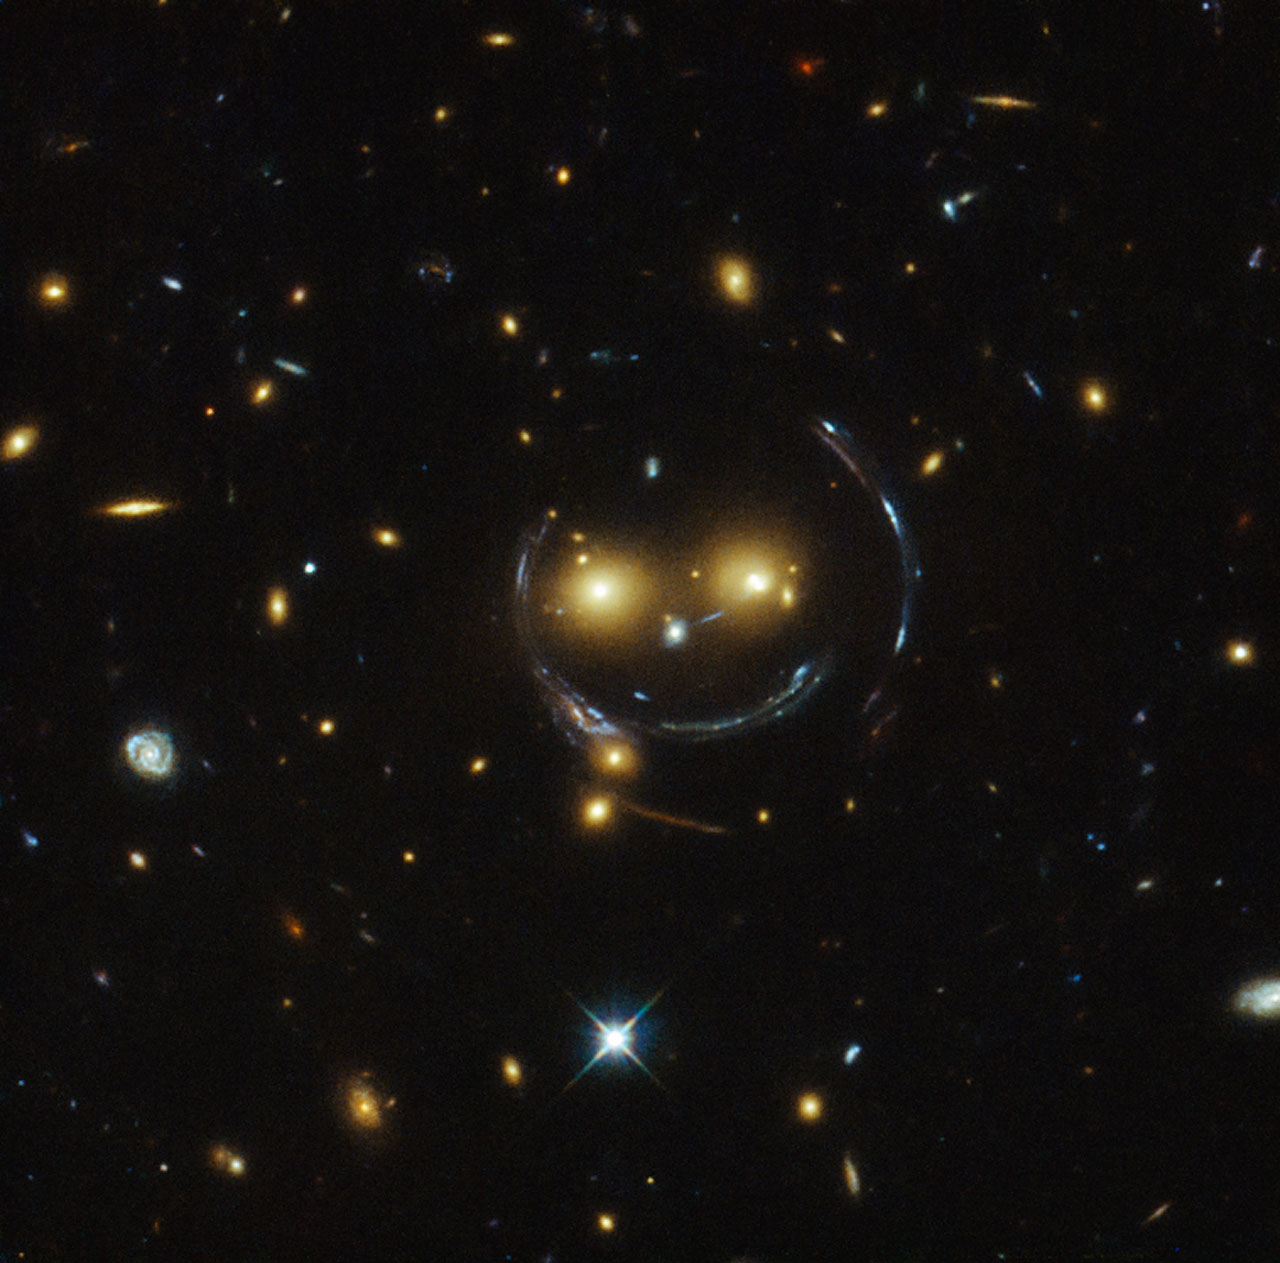 A picture of space showing an accidentally smiling face.